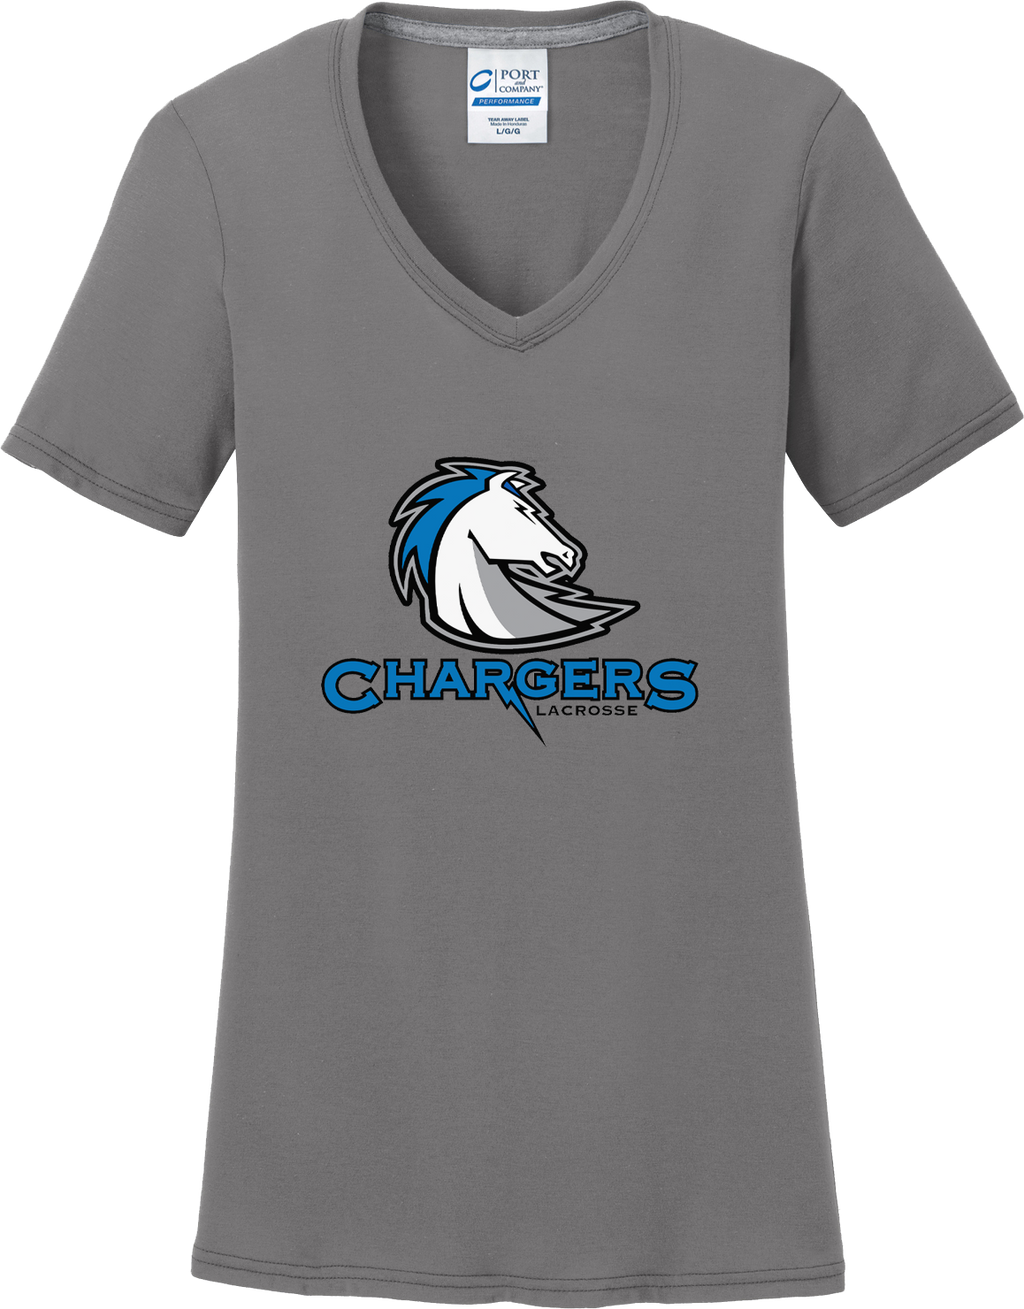 Clear Springs Chargers Football Jersey *Pre-Order*